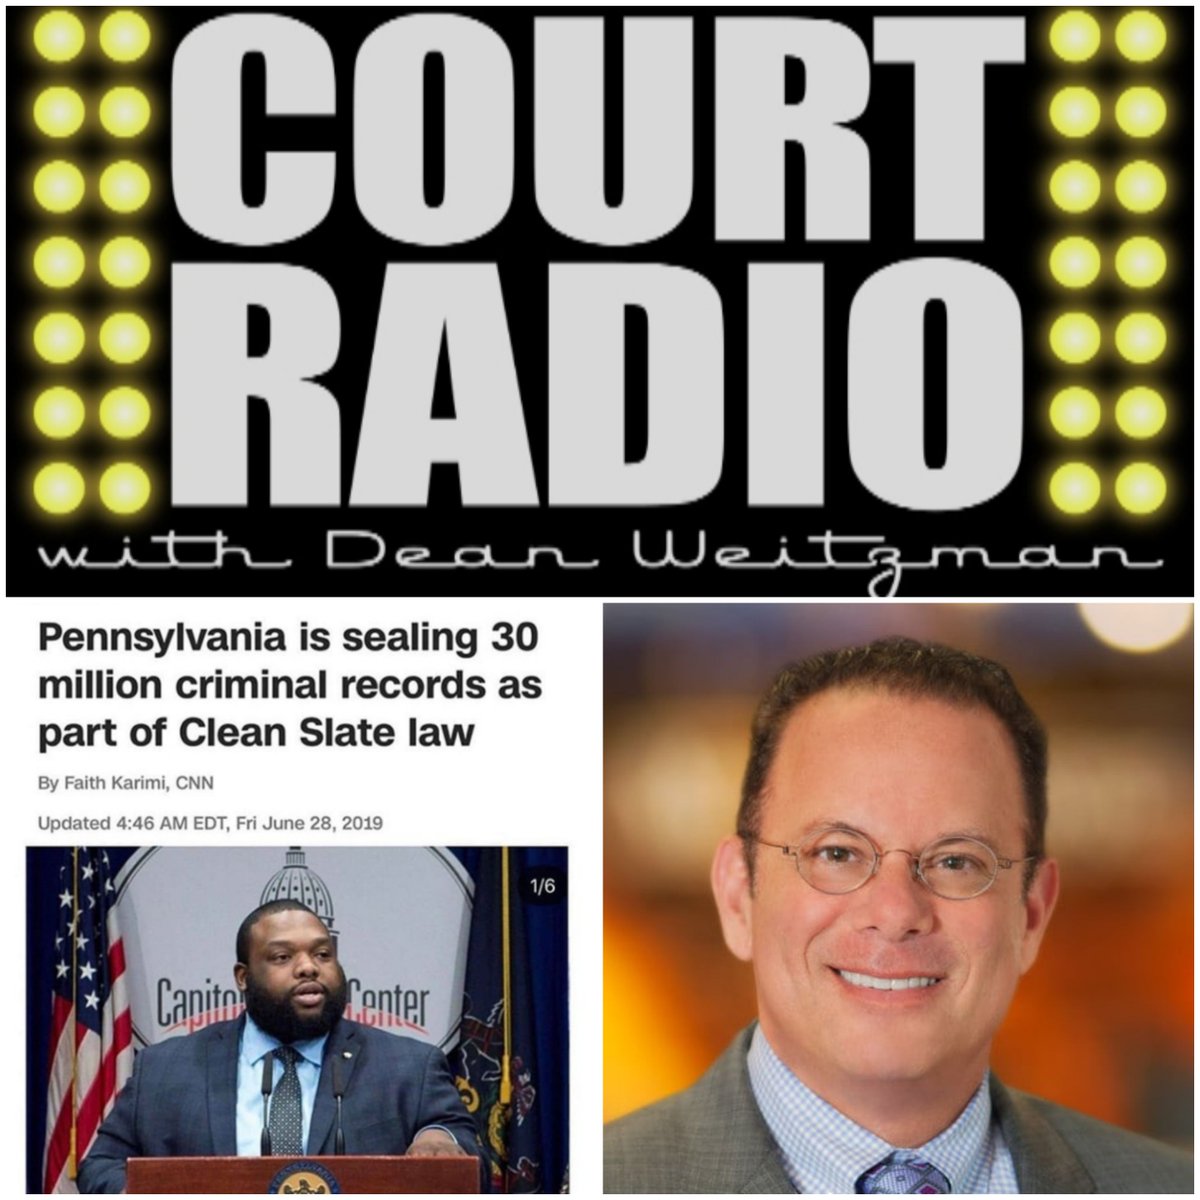 Sun. July 14, 7am, Court Radio: @jordanaharris will be our in studio guest with host @myphillylawyer Dean discussing Clean Slate Law and how it has helped Pennsylvanians. Syndicated. Tune in @rnbphilly @boomphilly @classixphilly #courtradio #phillyradio